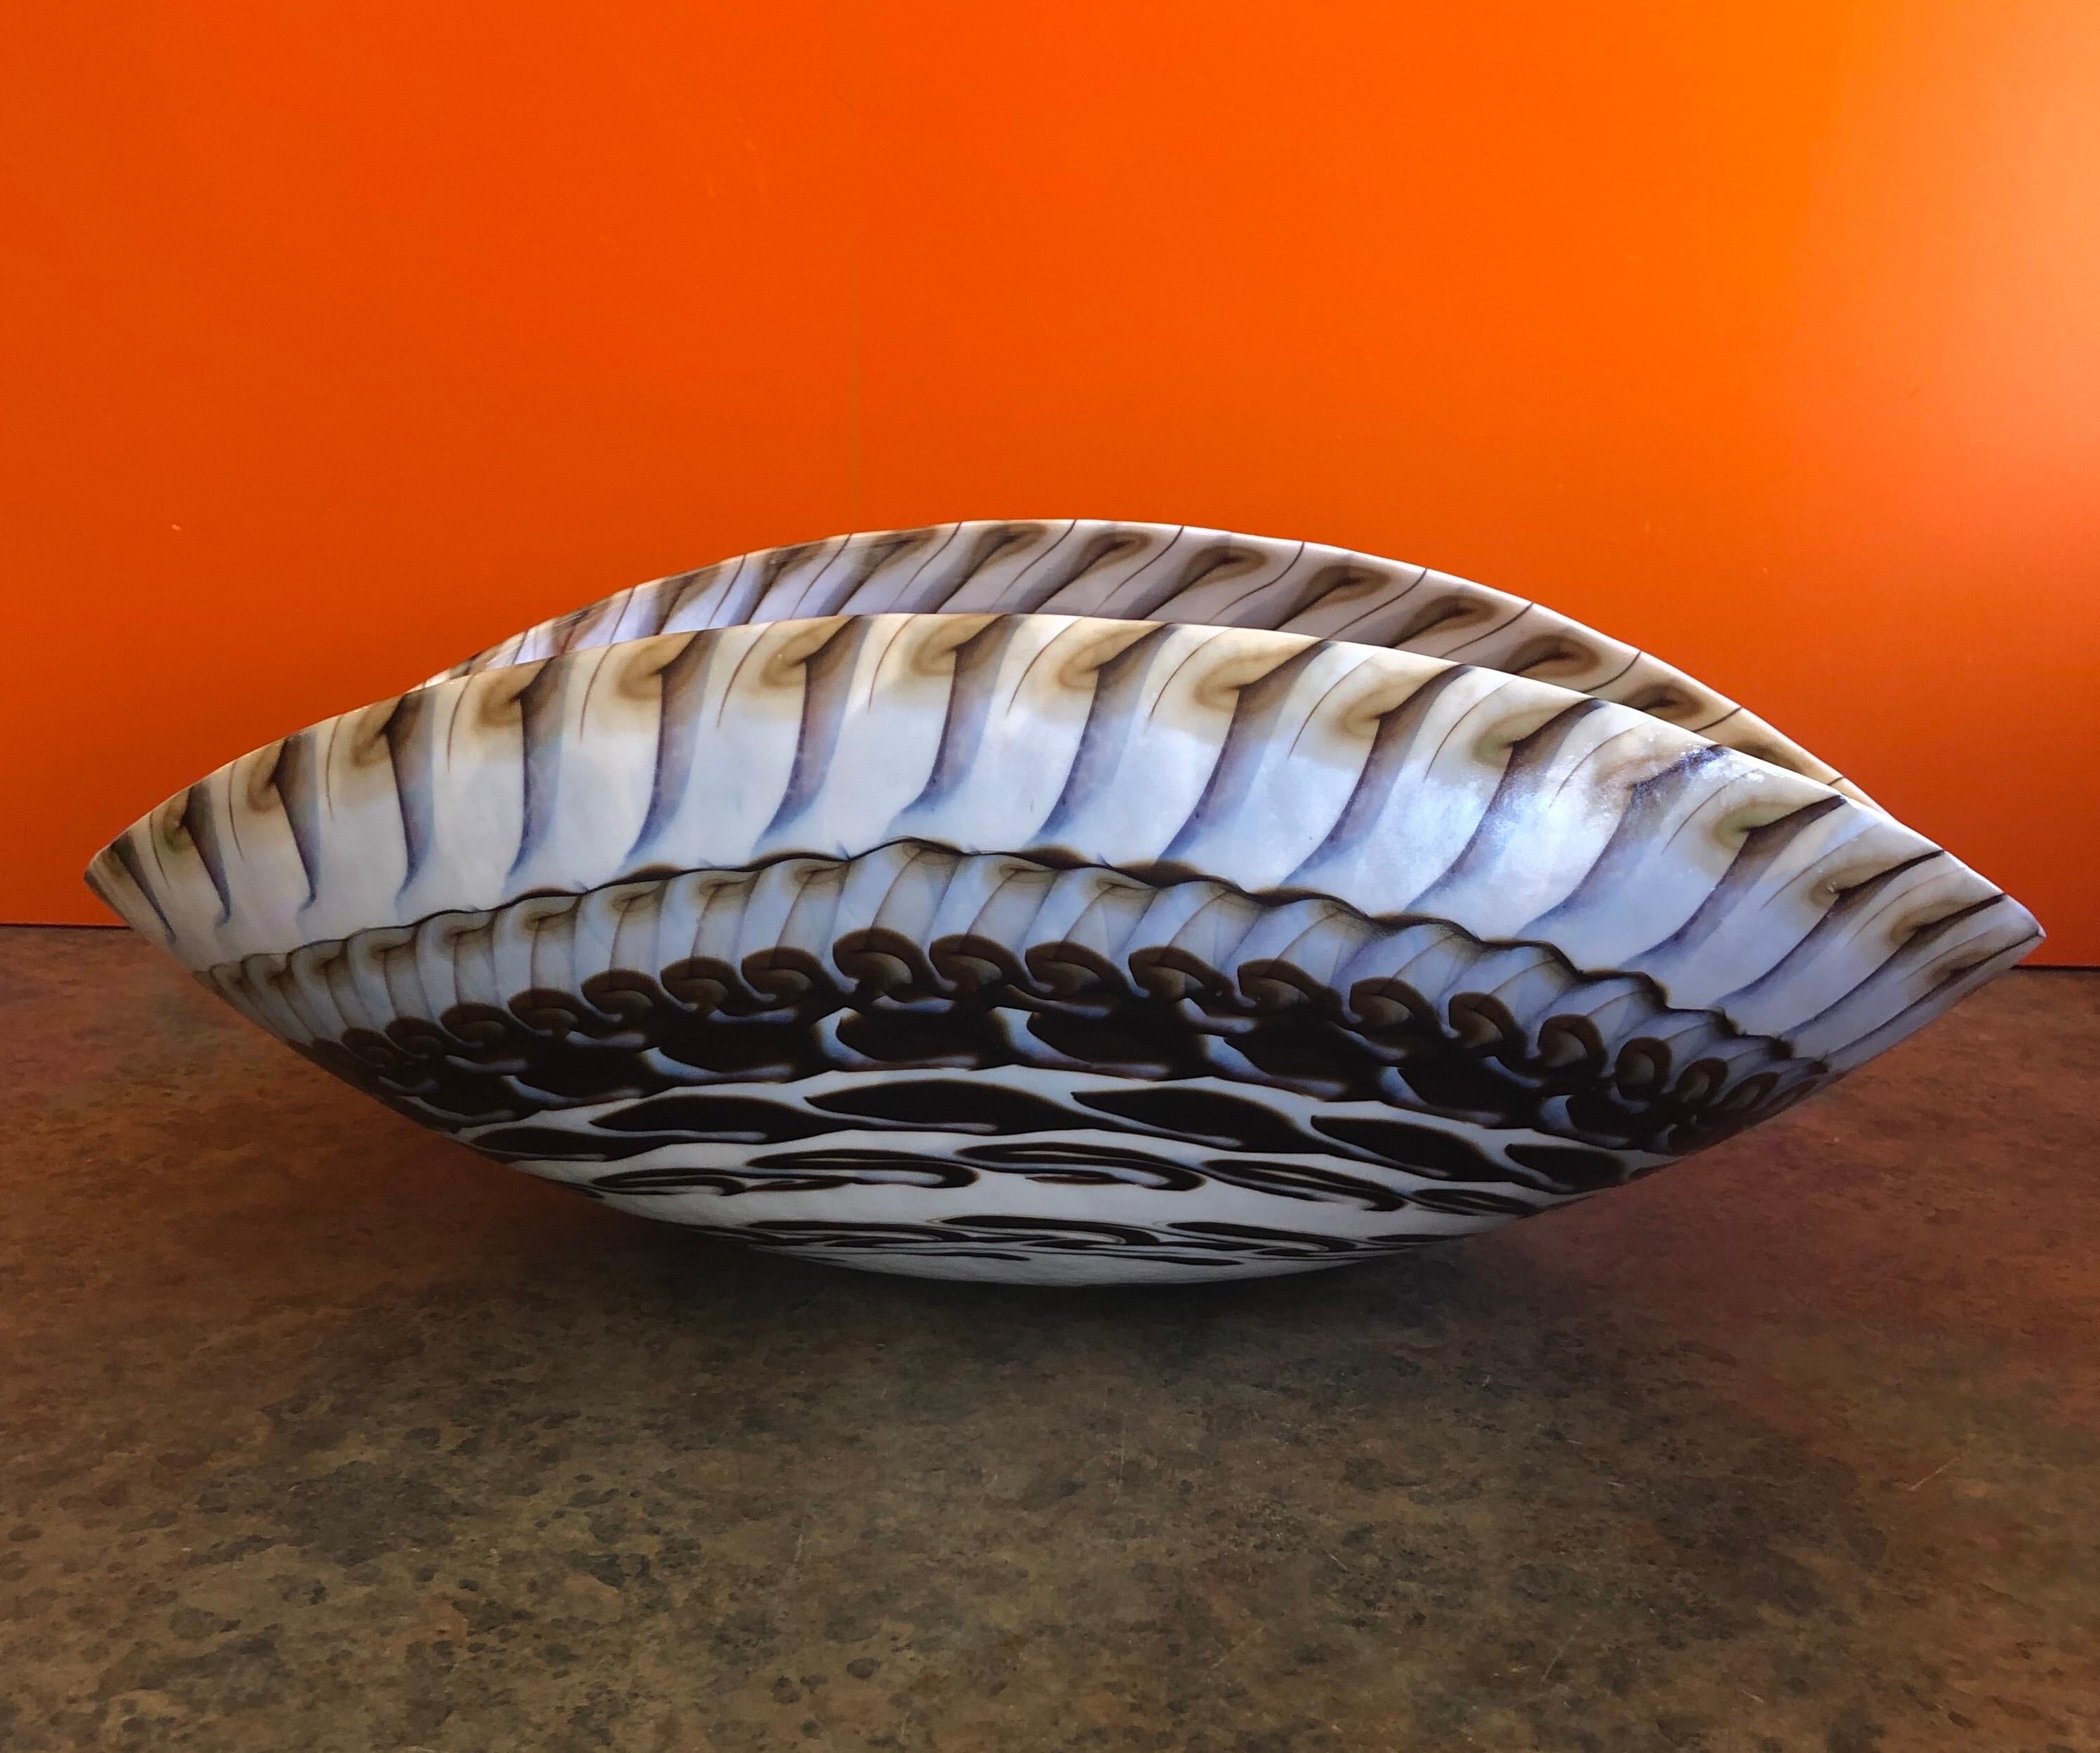 Extra Large Seashell Shaped Centerpiece Bowl By Yalos For Murano Glass At 1stdibs Yalos